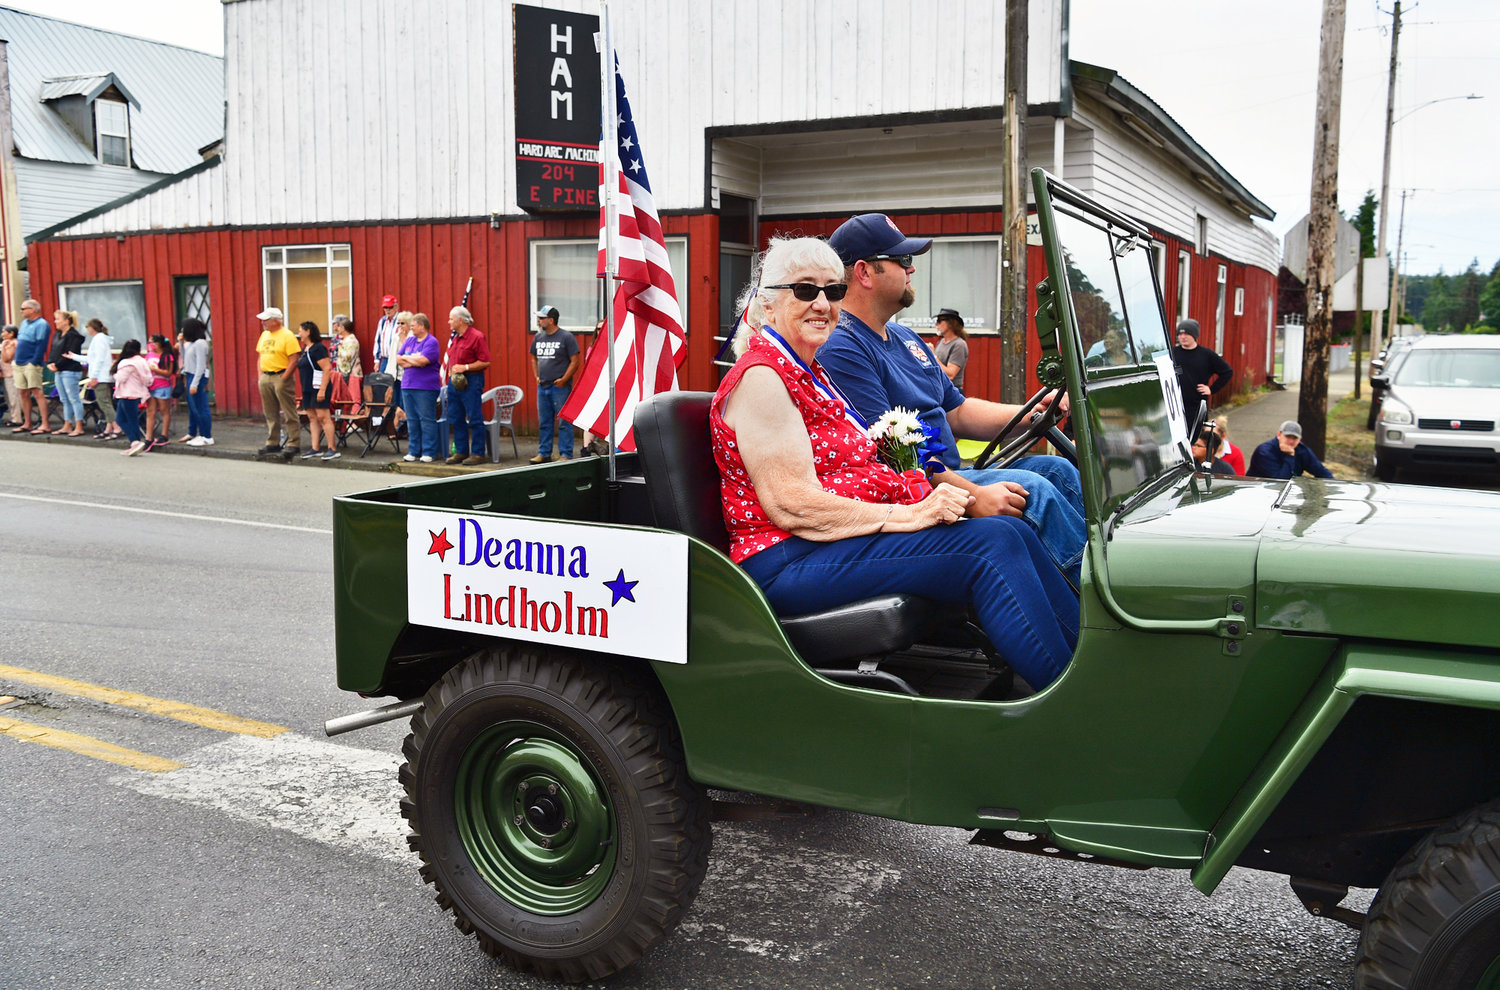 Deanna Lindholm, a longtime Oakville resident and community leader, led Oakville’s Independence Day parade as grand marshal on Saturday, July 3.